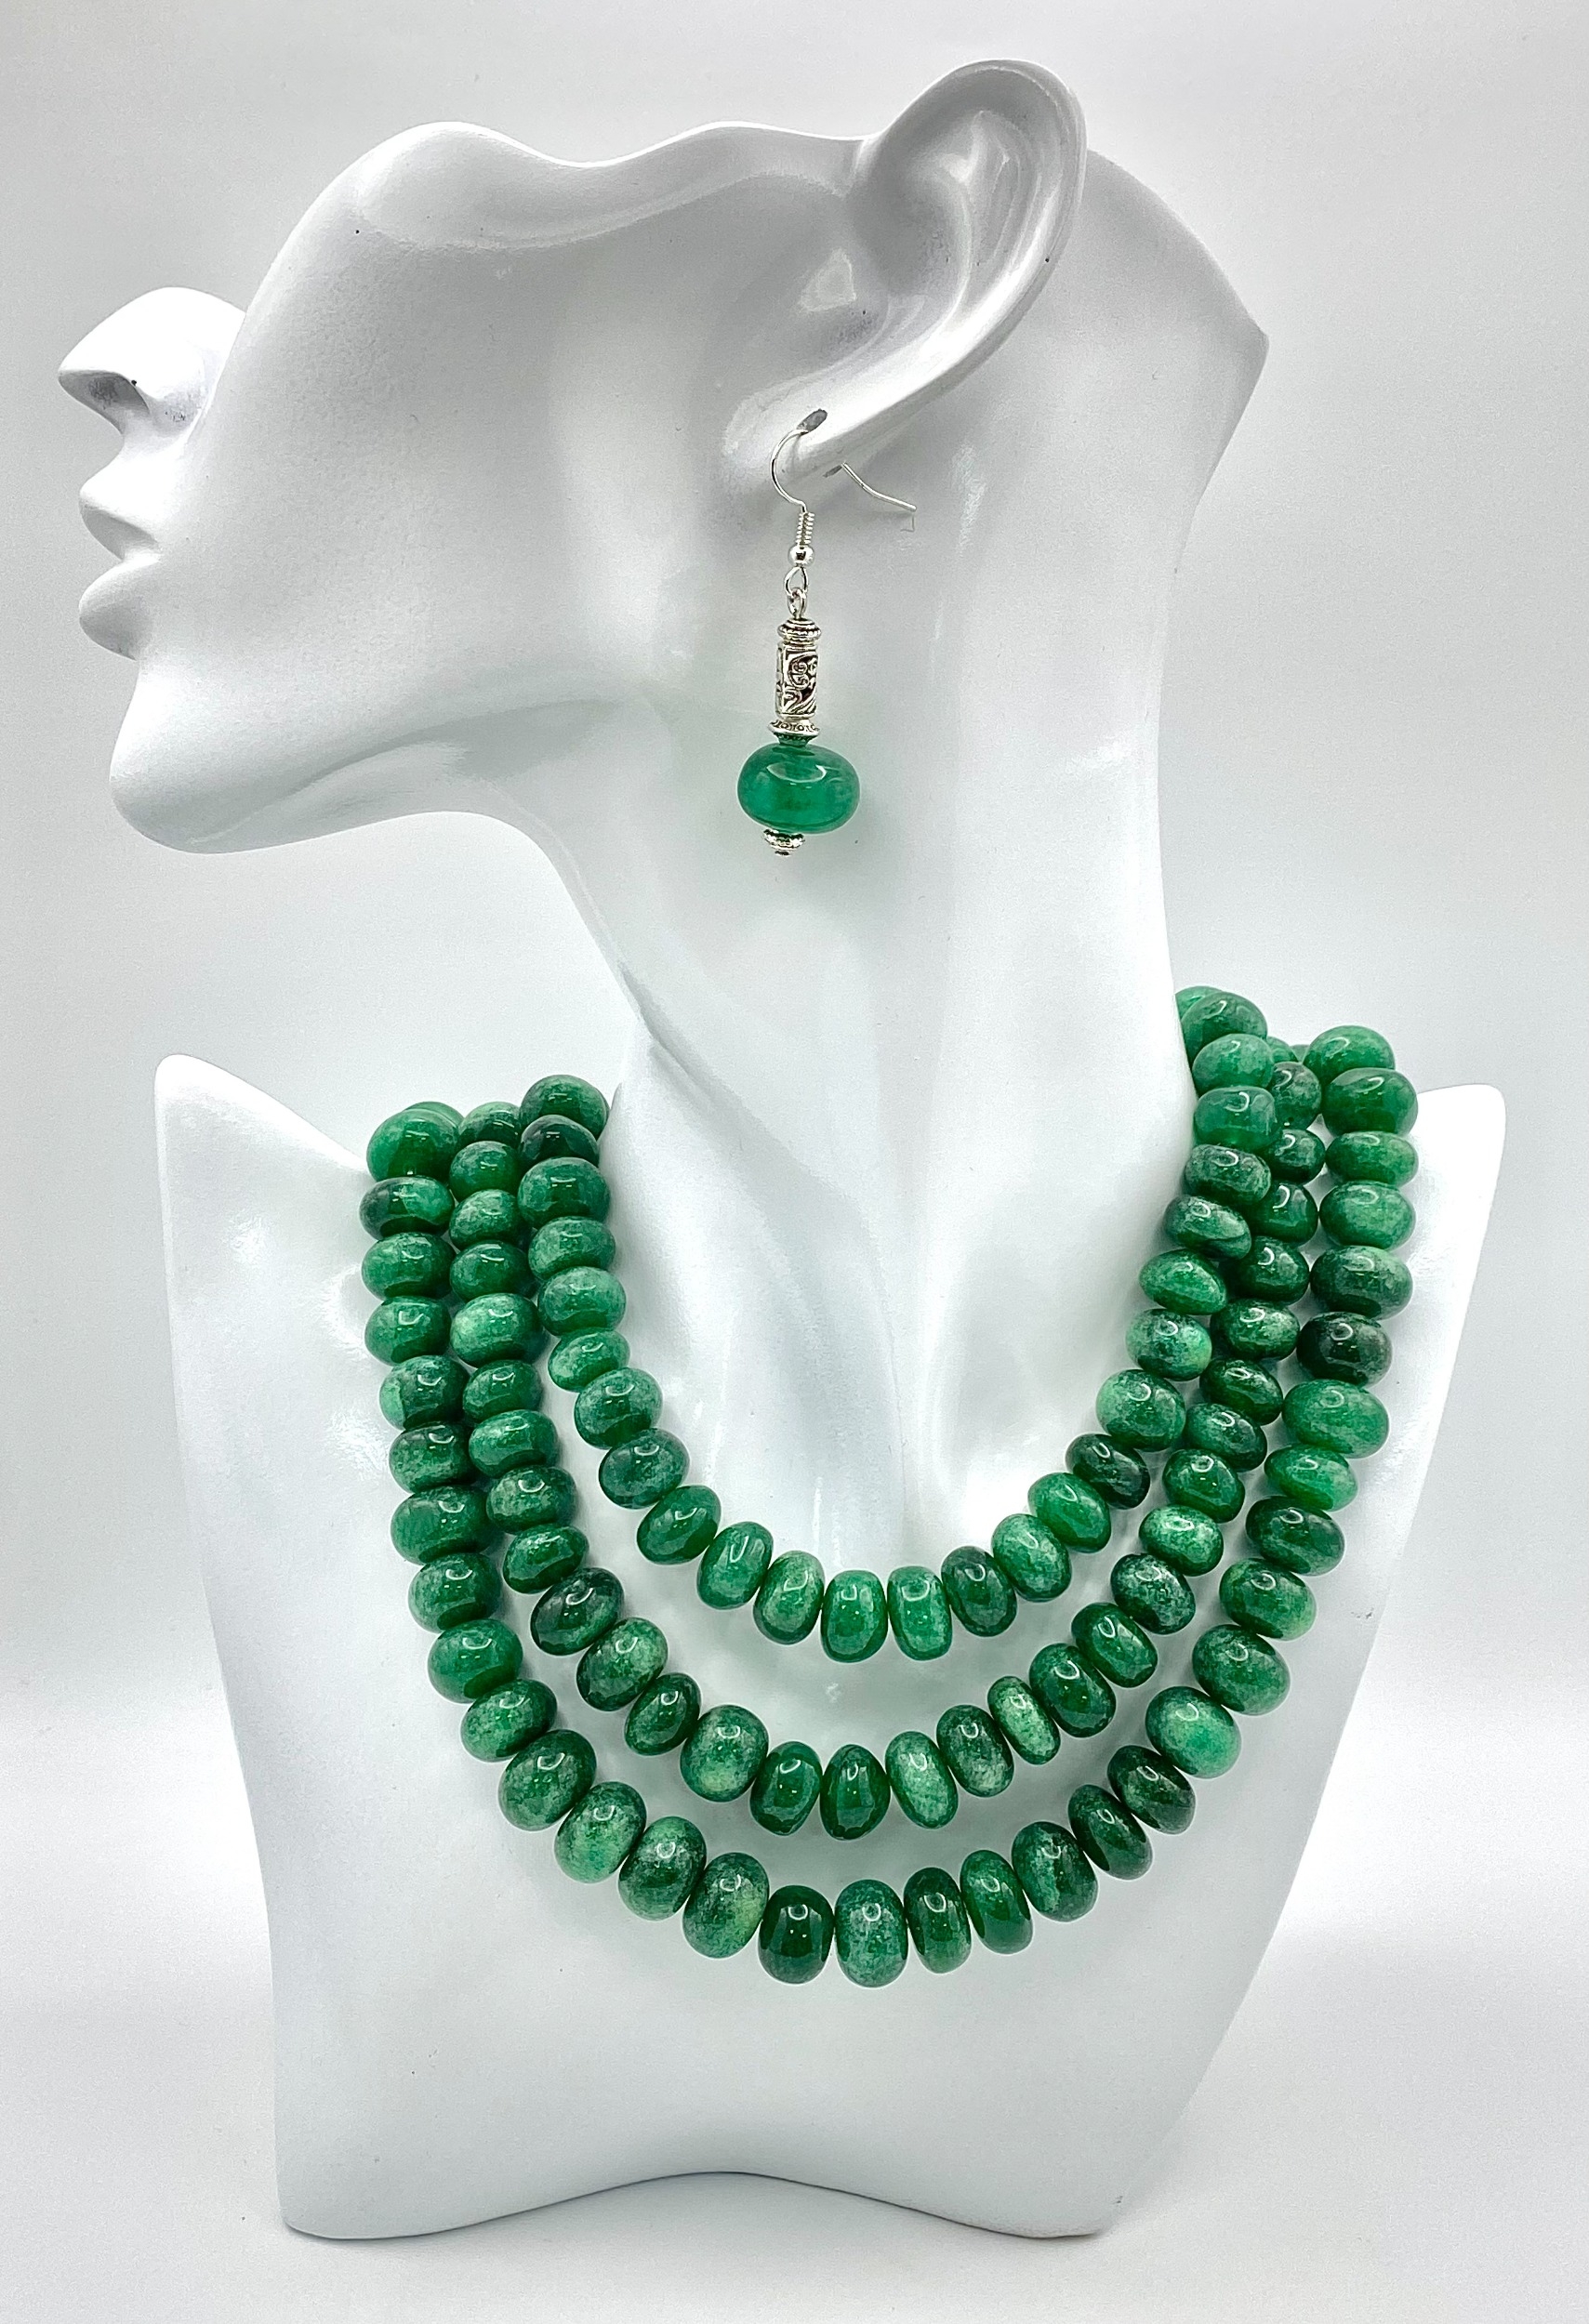 A Tibetan silver necklace with three rows of substantial round emerald cabochons accompanied by a